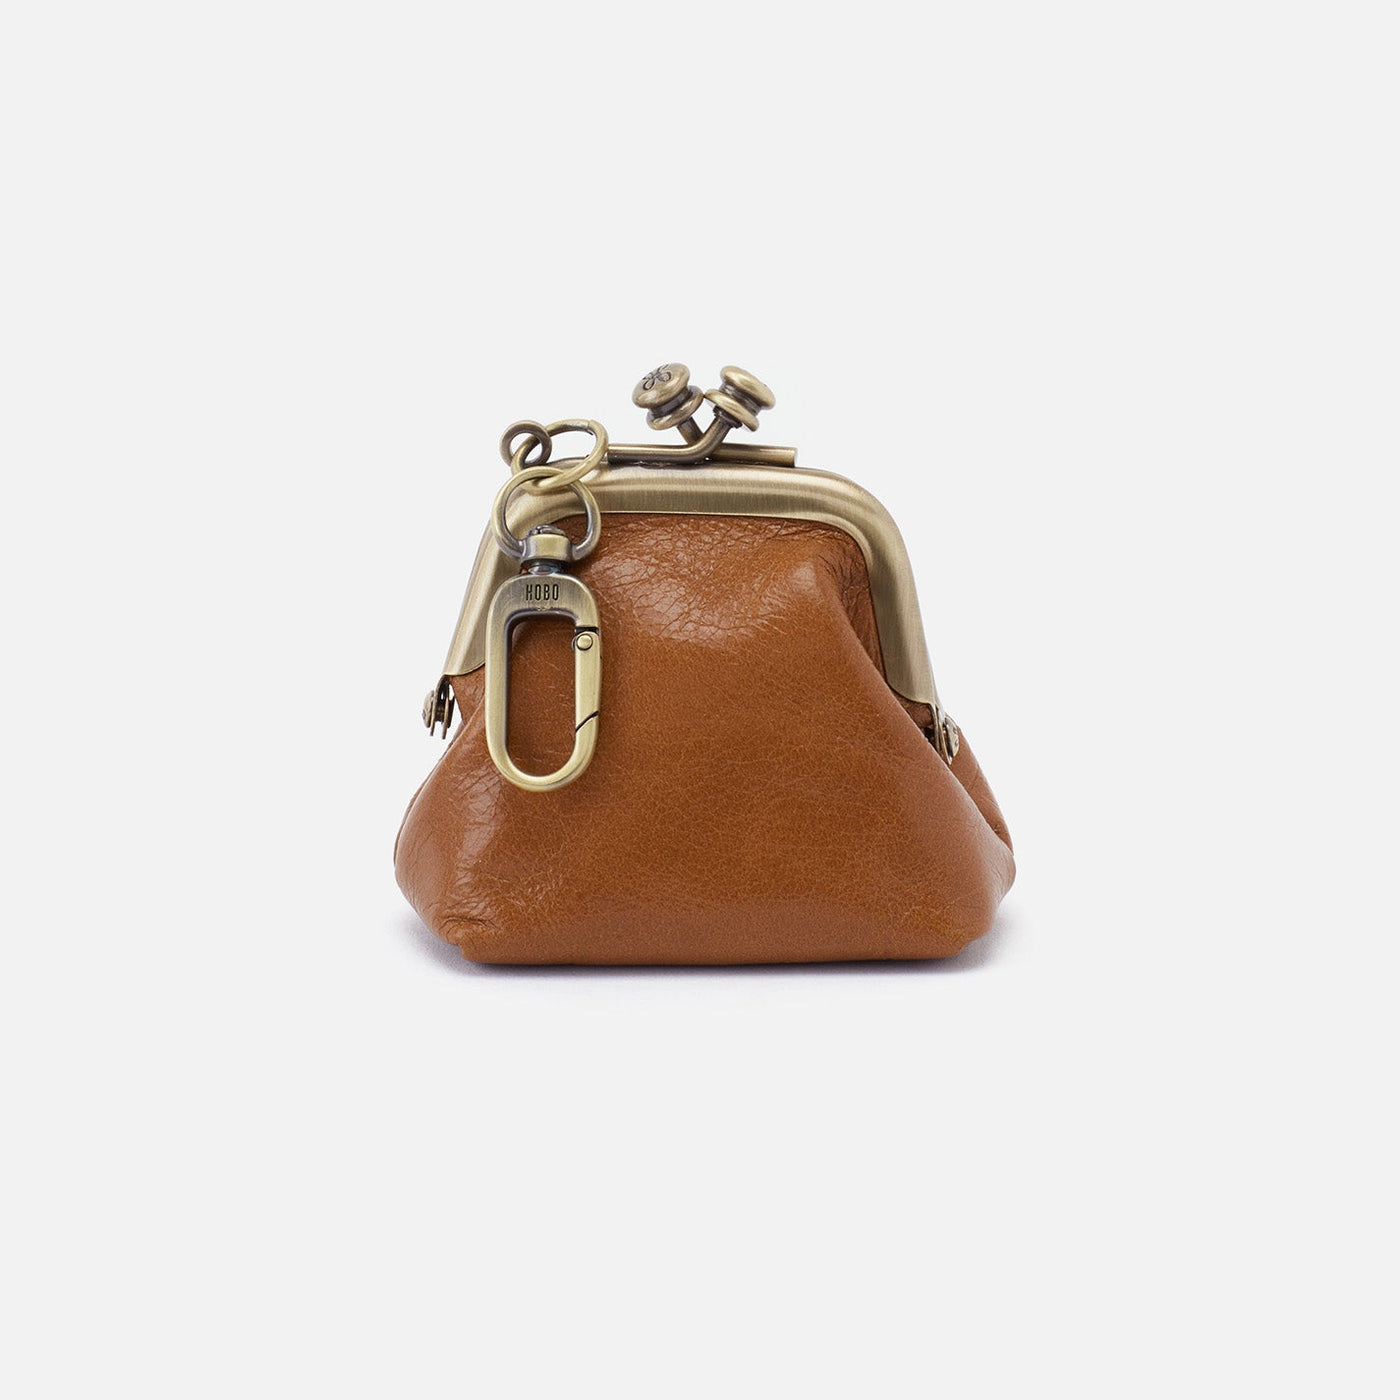 Run Frame Pouch in Polished Leather - Truffle